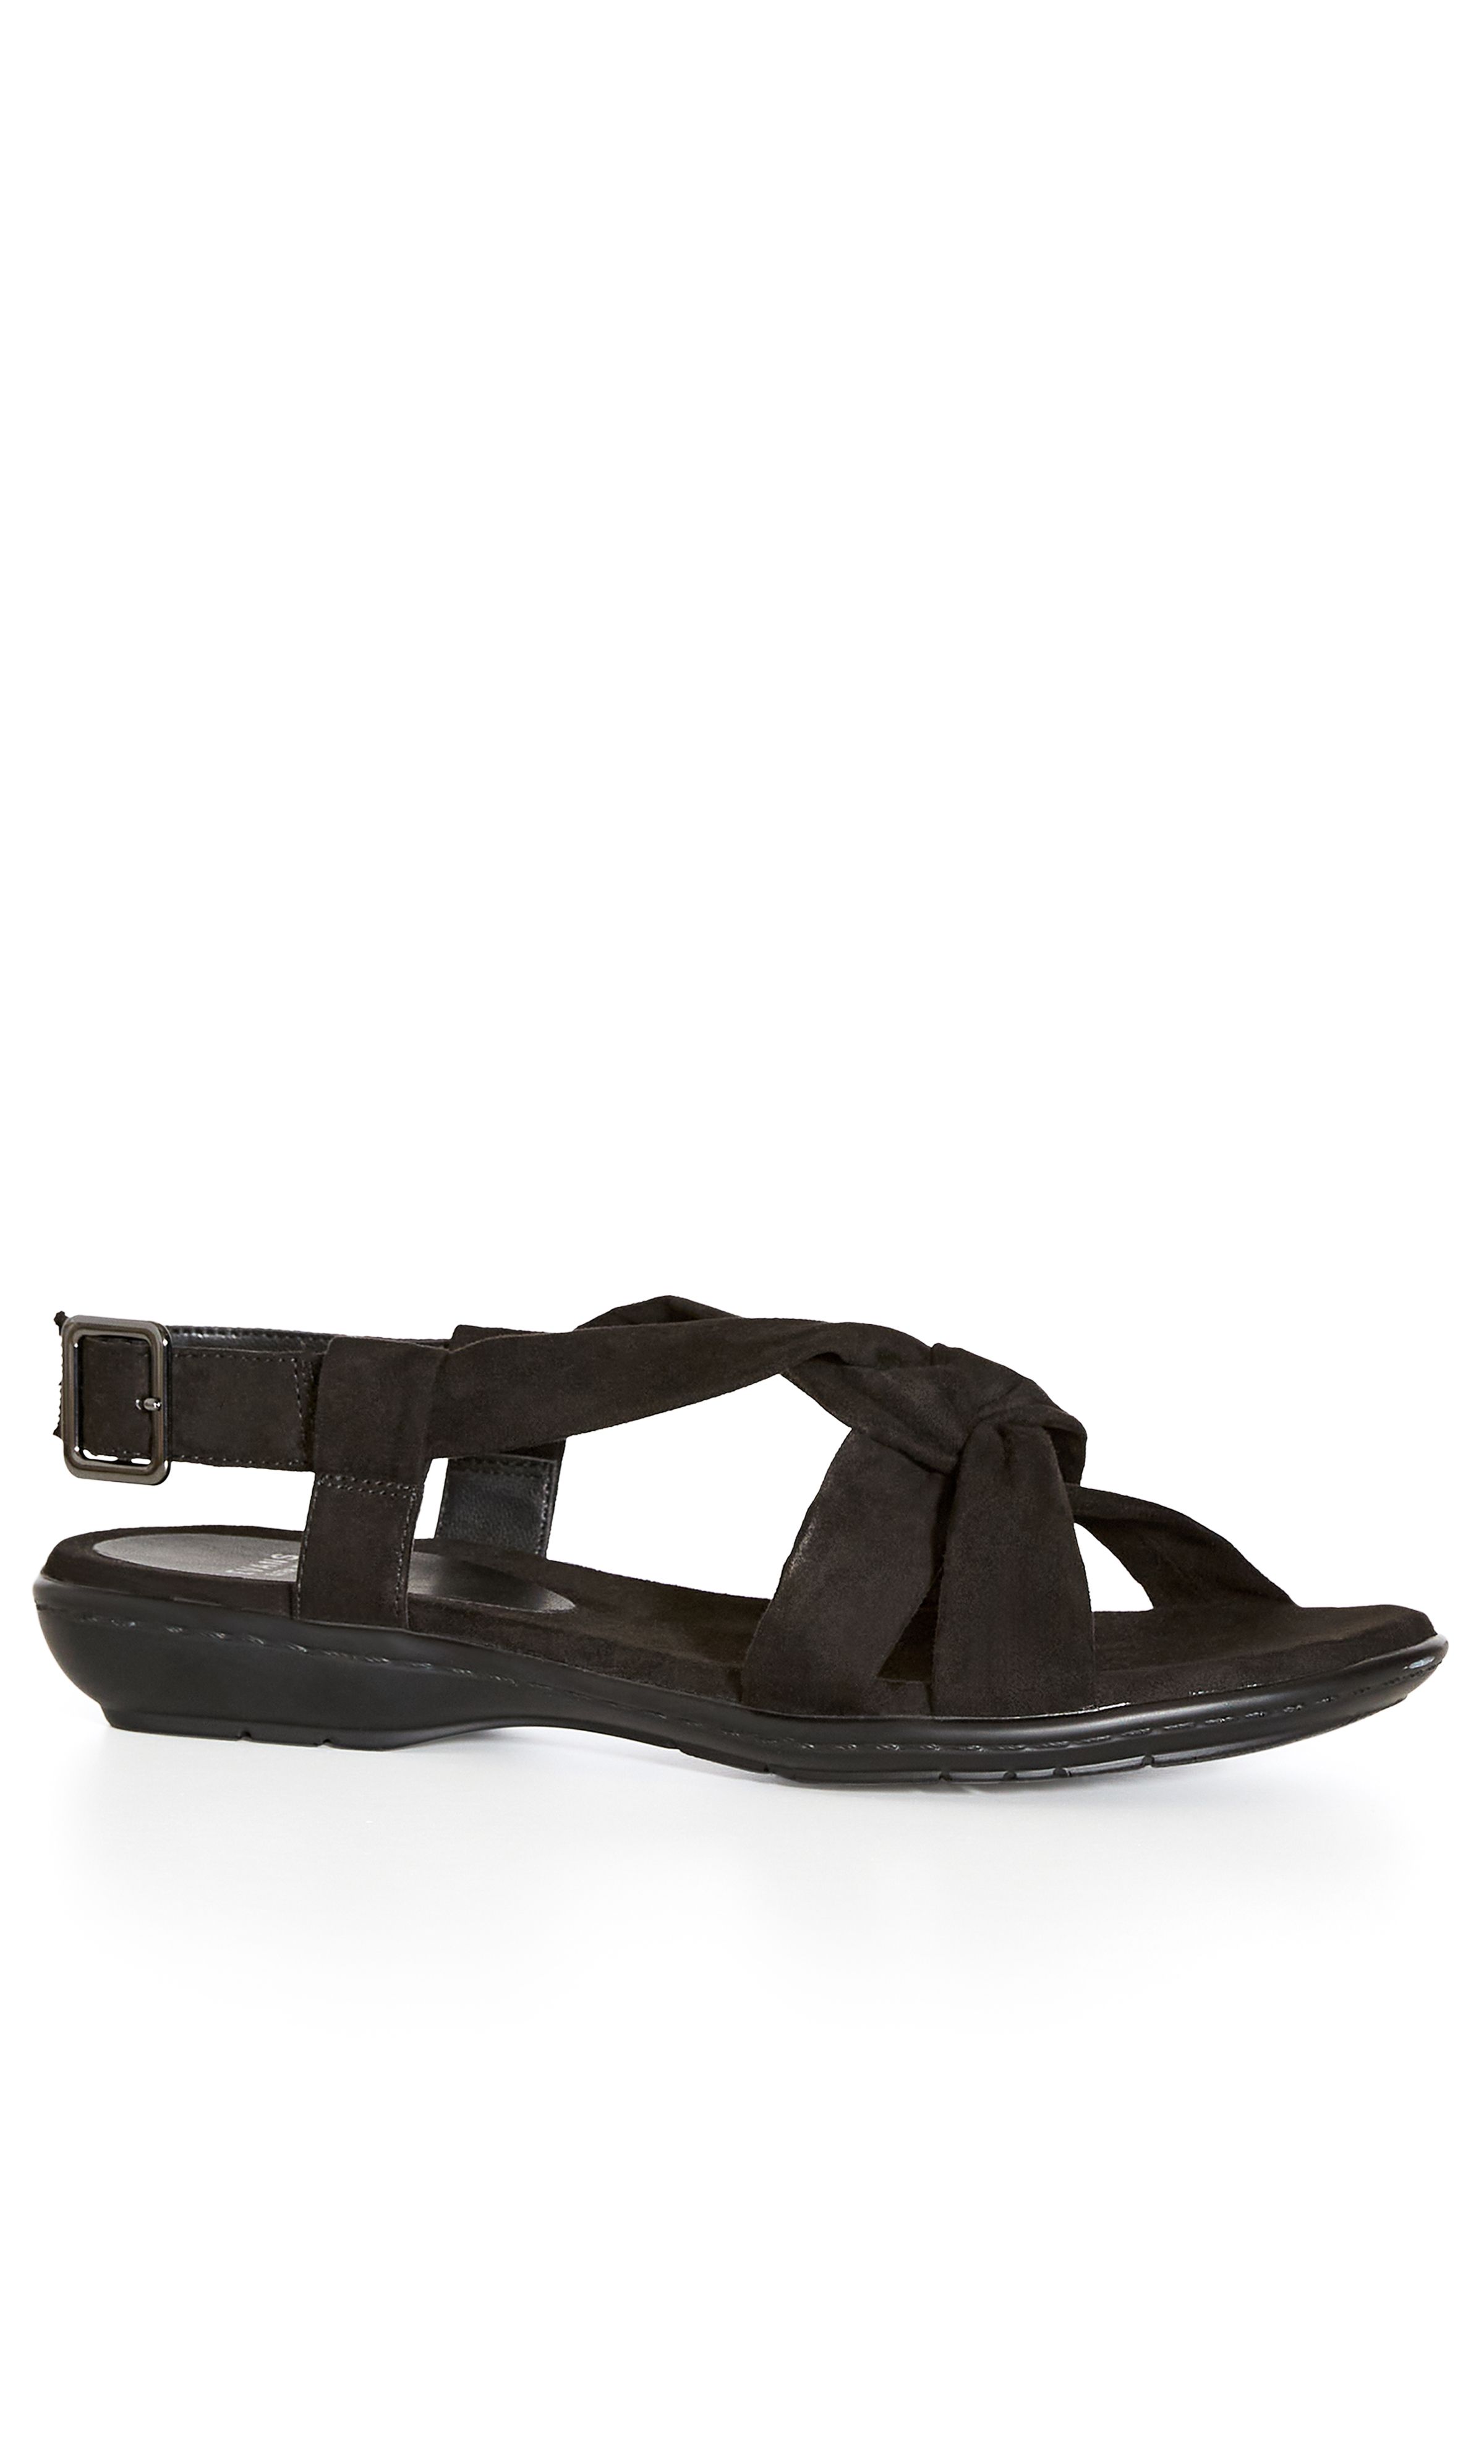 The pretty sandals to add to your collection. Twist front detailing keeps these on-trend, whilst a classic black finish will have you wearing this versatile pair on-repeat. 100% TEXTILE. wipe clean only.